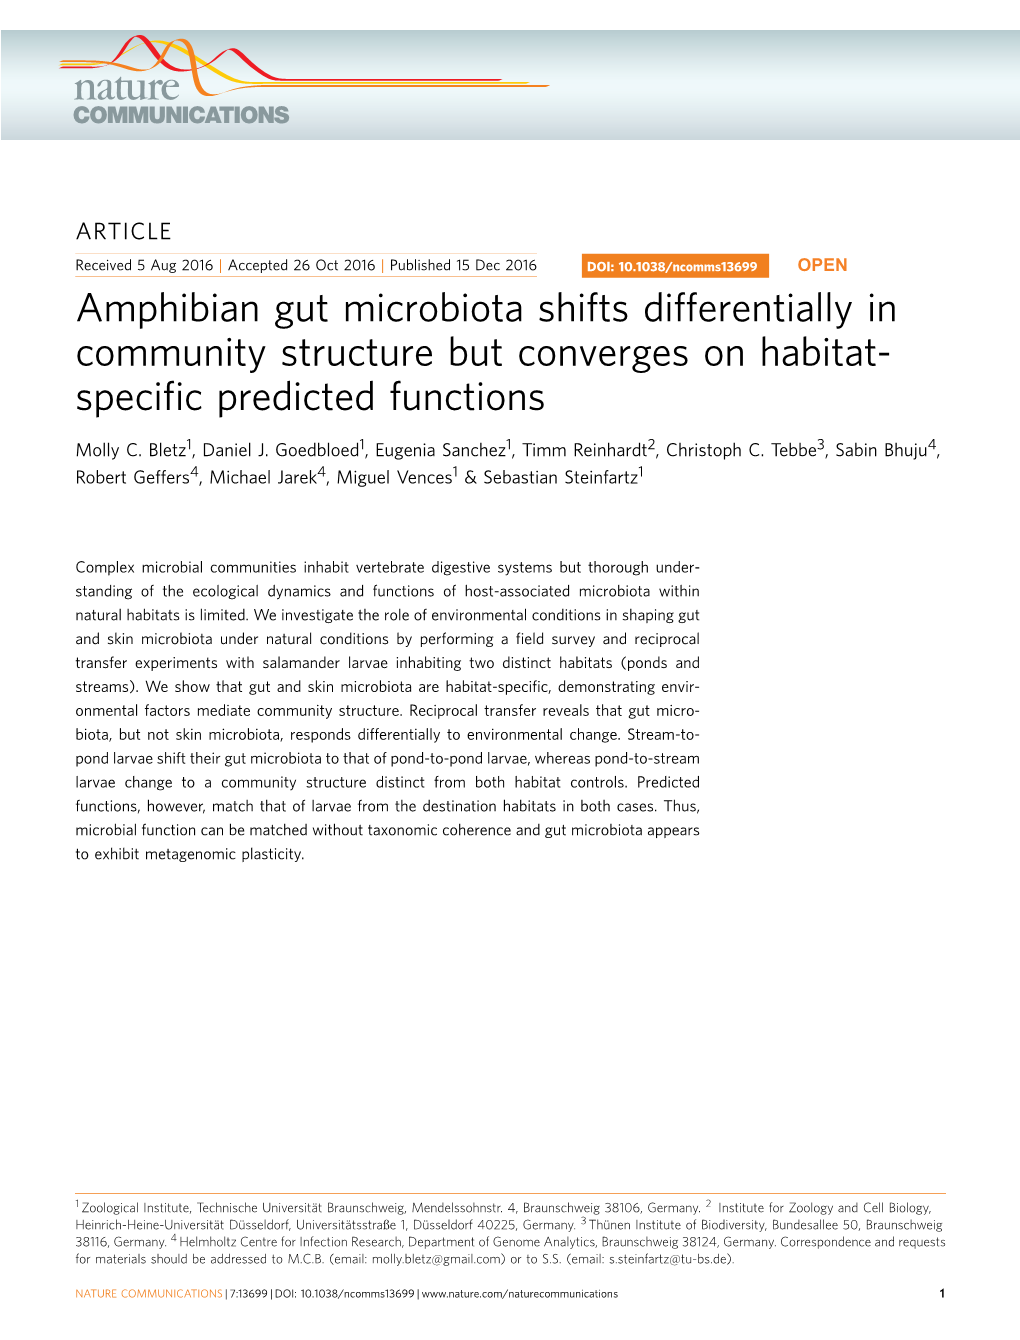 Amphibian Gut Microbiota Shifts Differentially in Community Structure but Converges on Habitat- Speciﬁc Predicted Functions